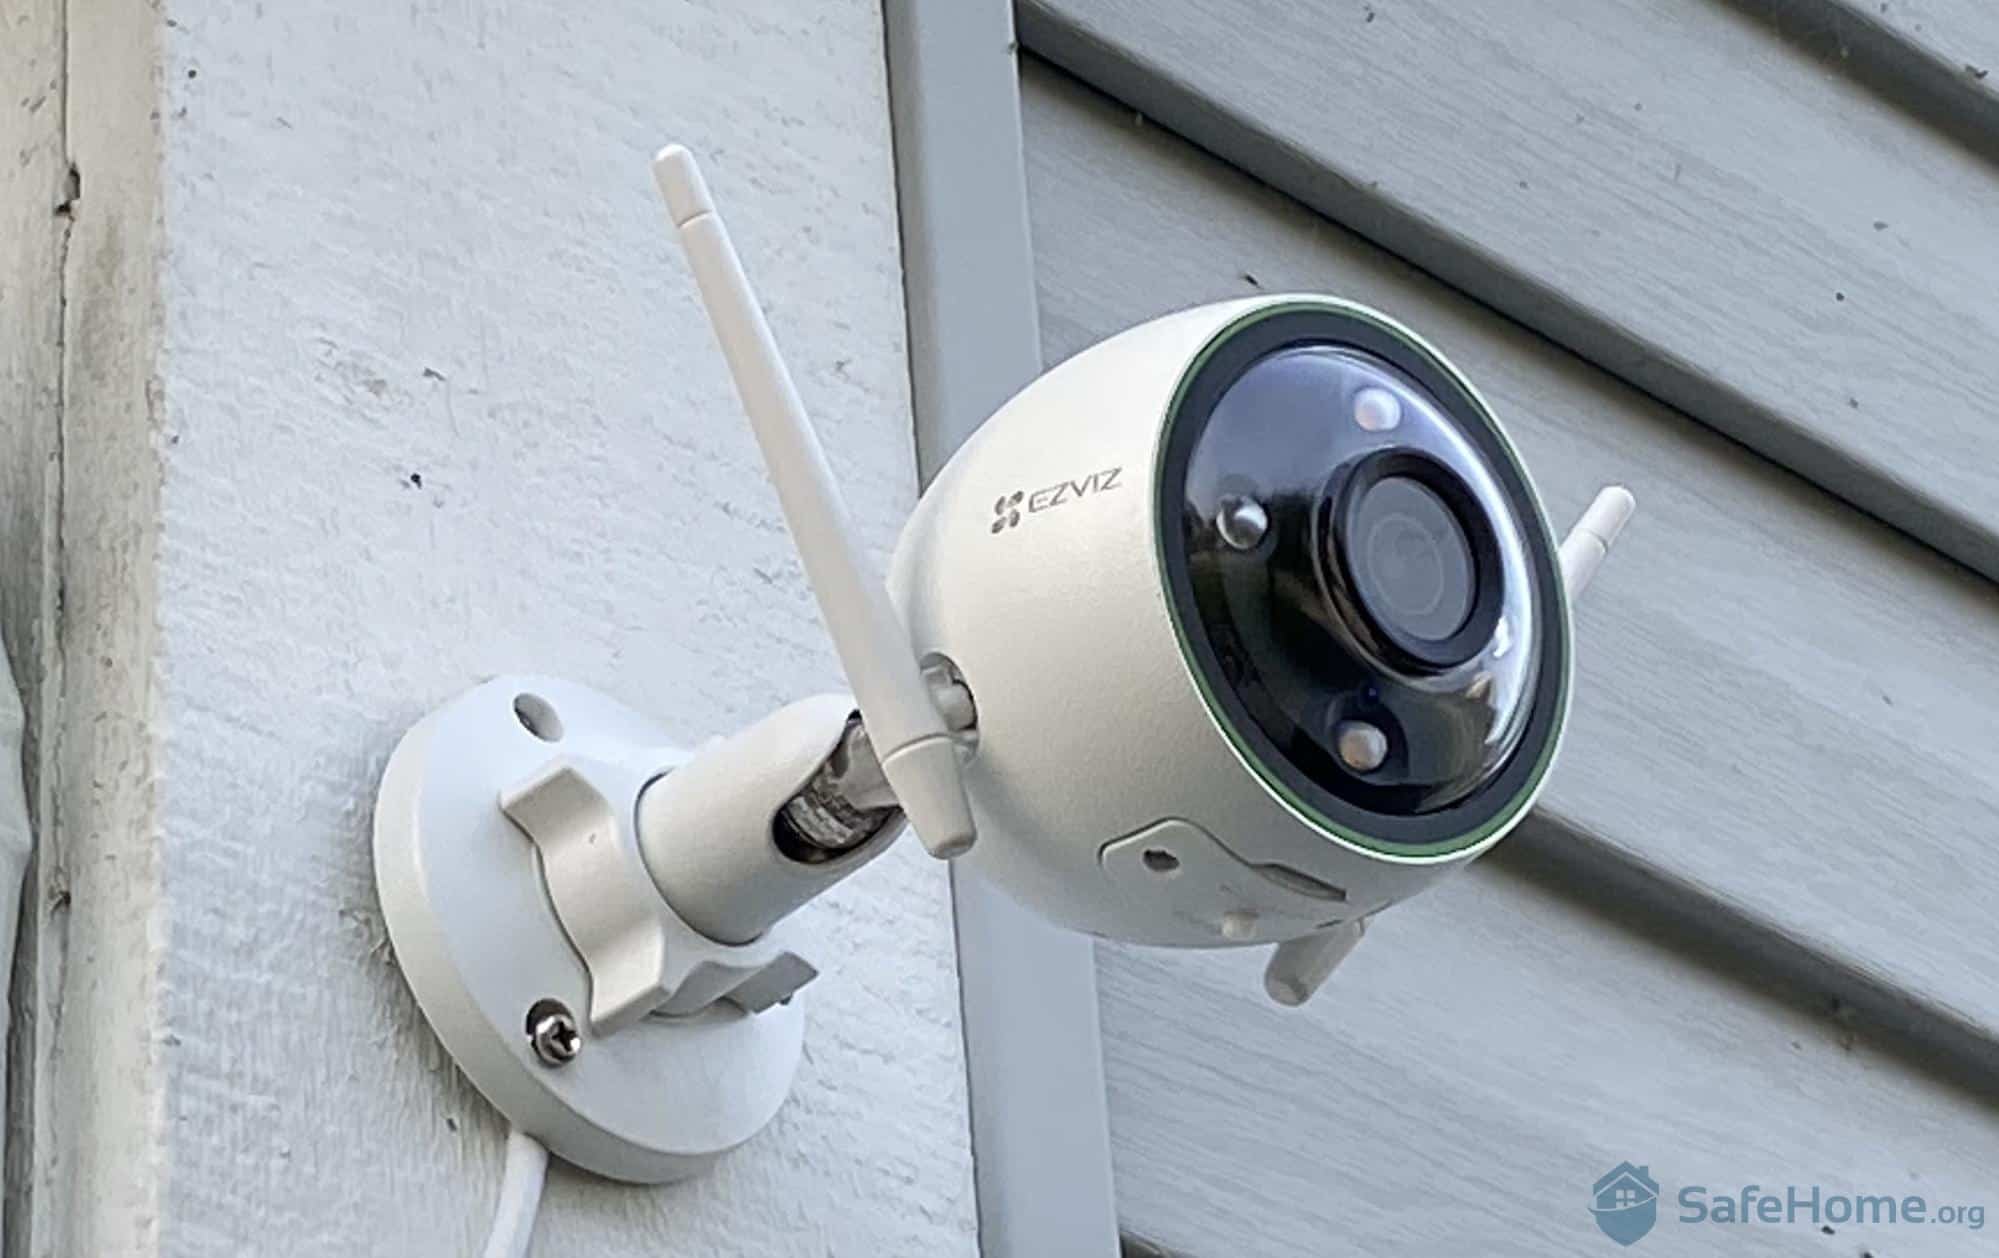 The new EZVIZ H3C Camera offers affordable but effective outdoor home  protection